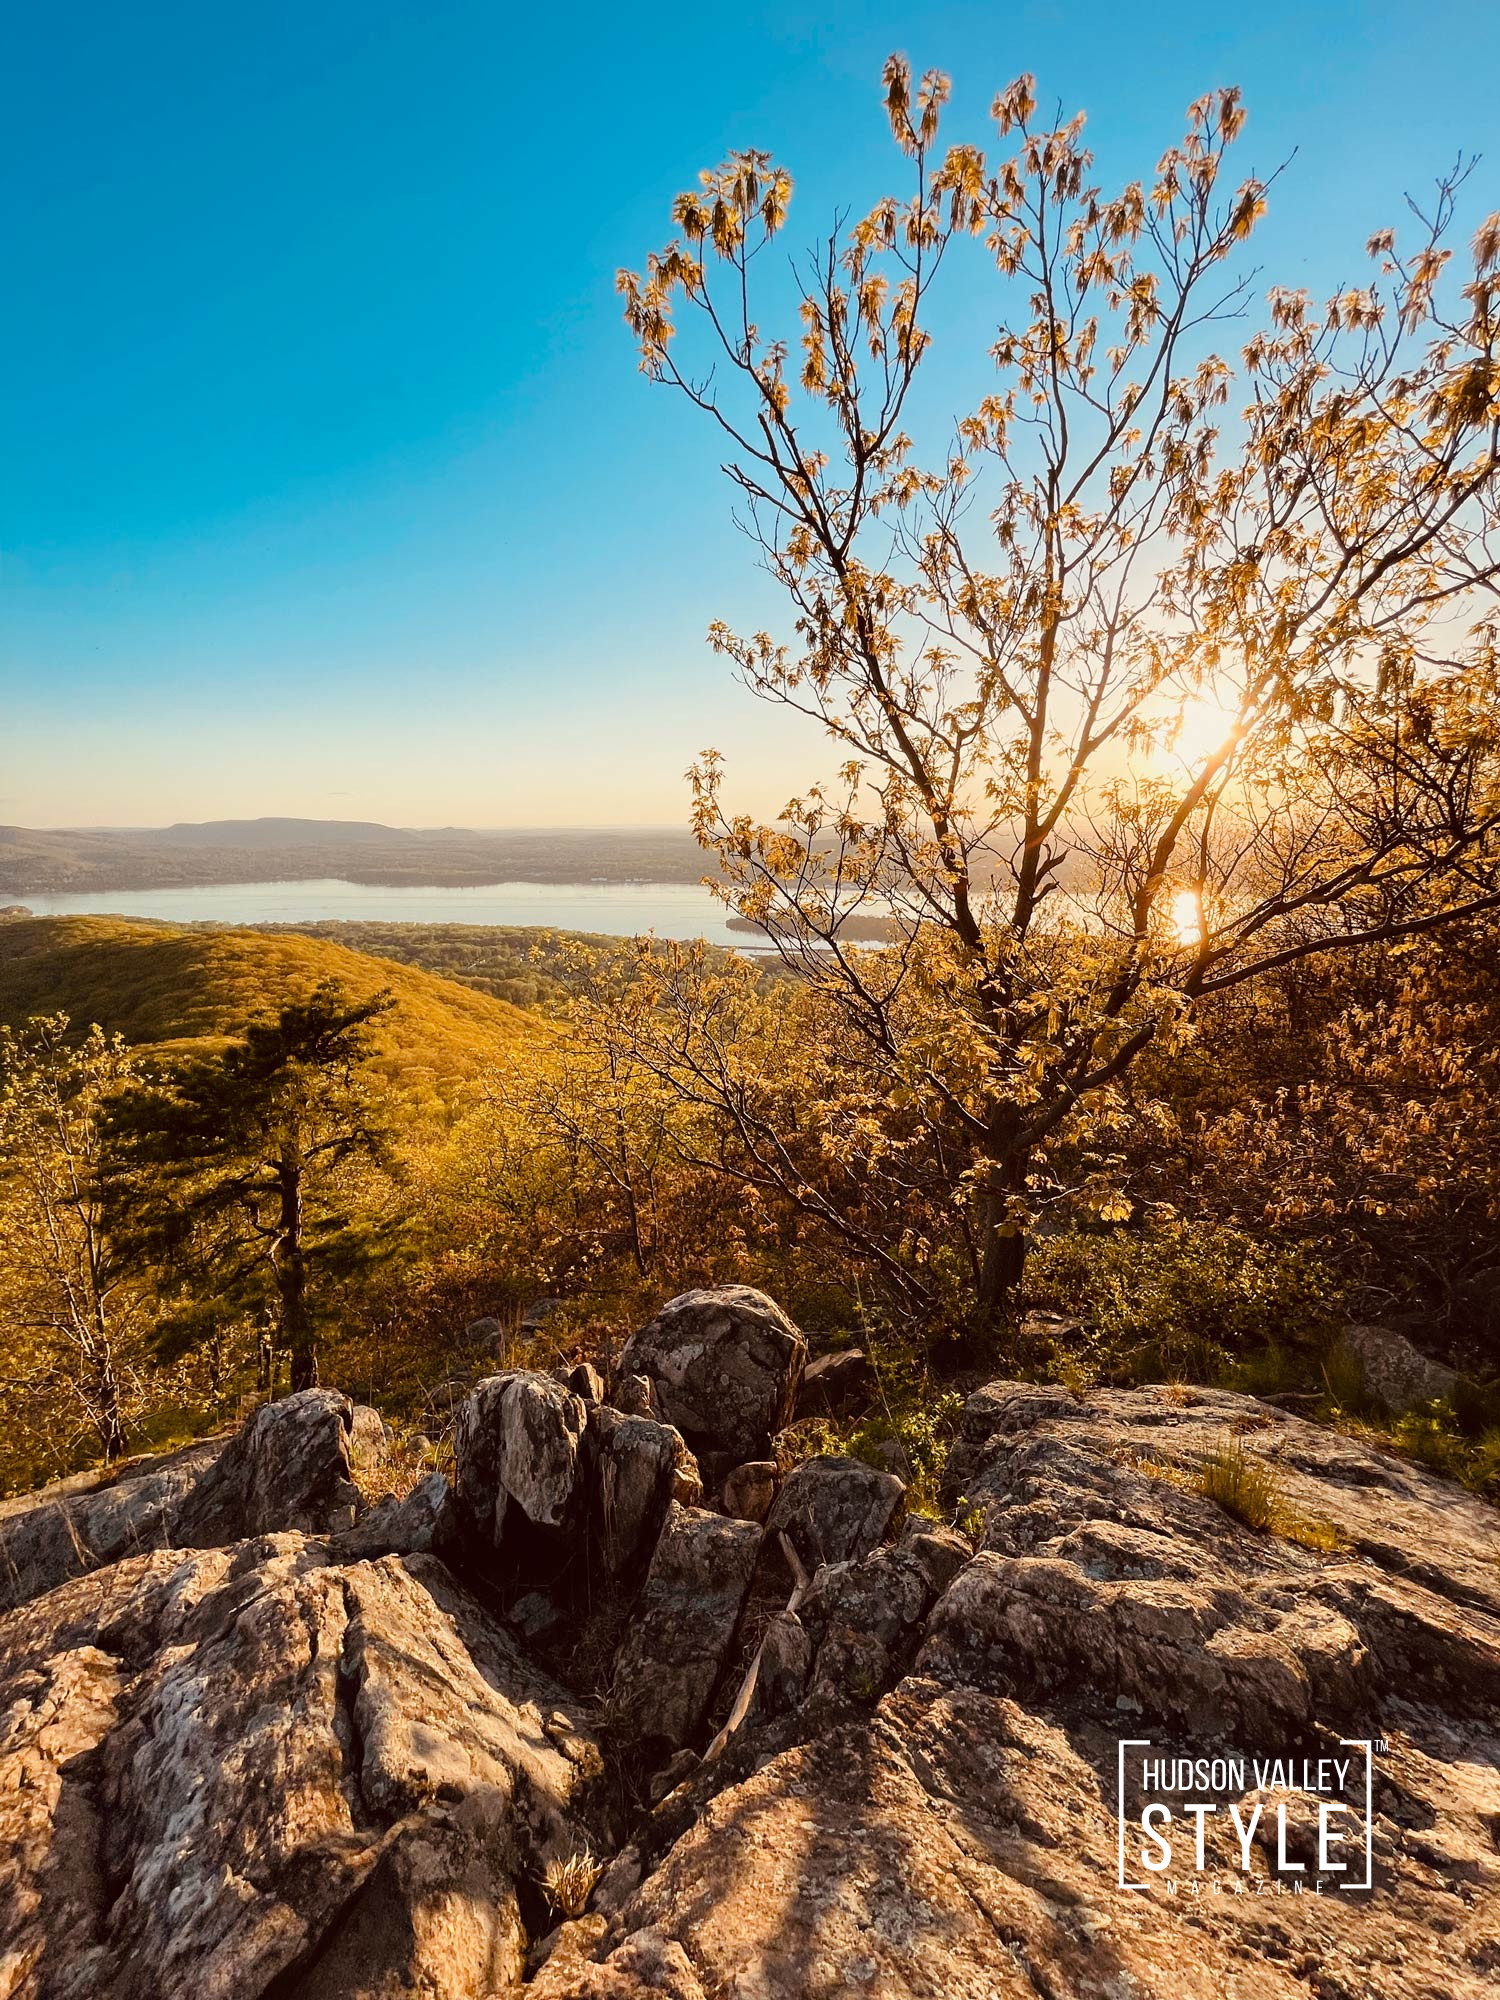 Backpacking in the Hudson Valley: Don't Forget to Bring a Natural Bug Repellent – Hudson Valley hiking adventures with Coach Maxwell Alexander – Presented by DA Aromatherapy Natural Bug Repellents